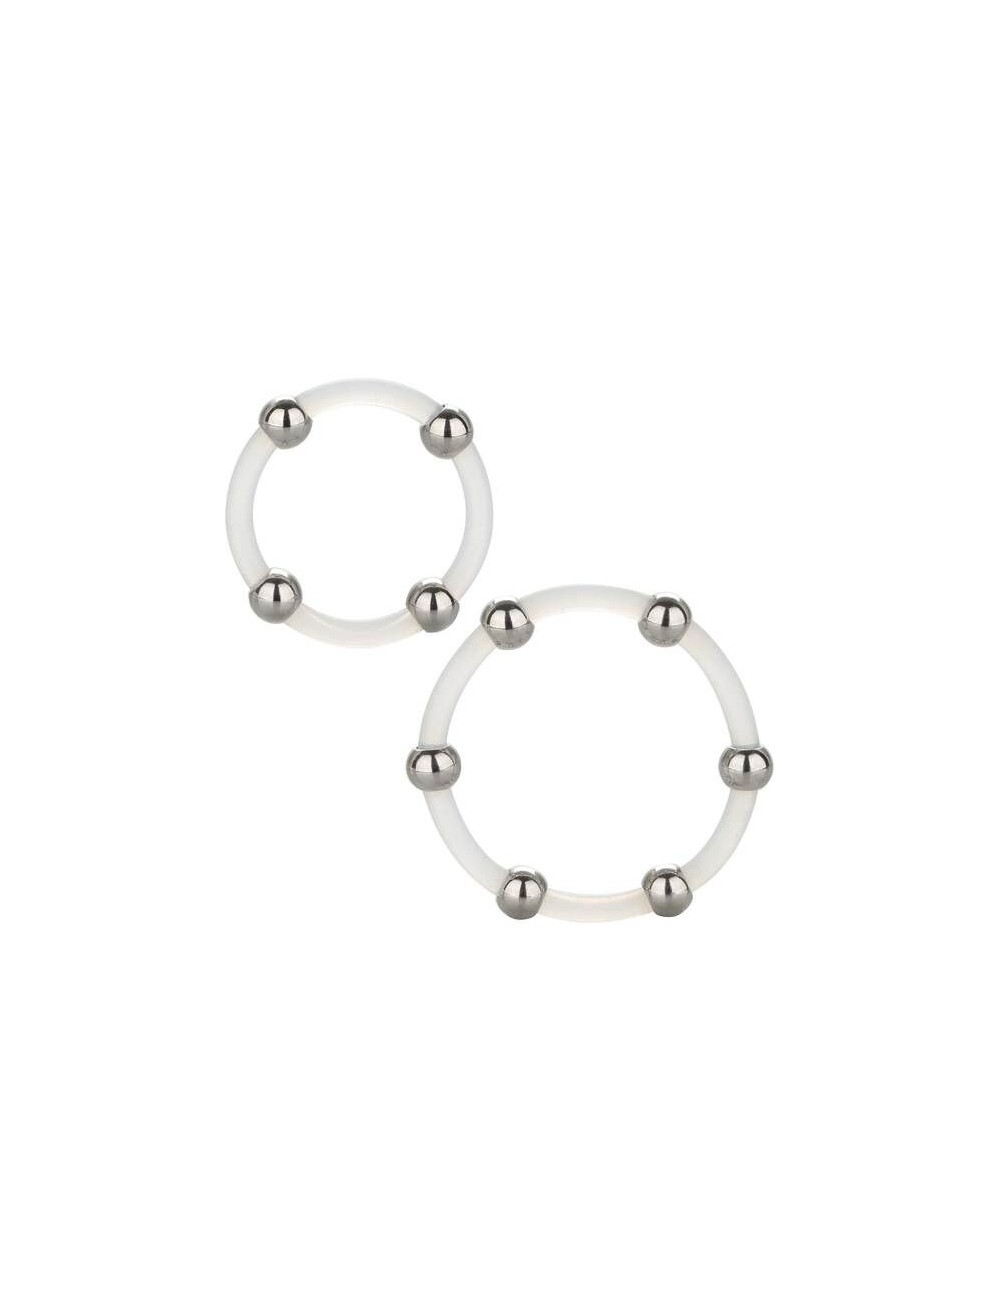 CALEX STEEL BEADED SILICONE RING SET